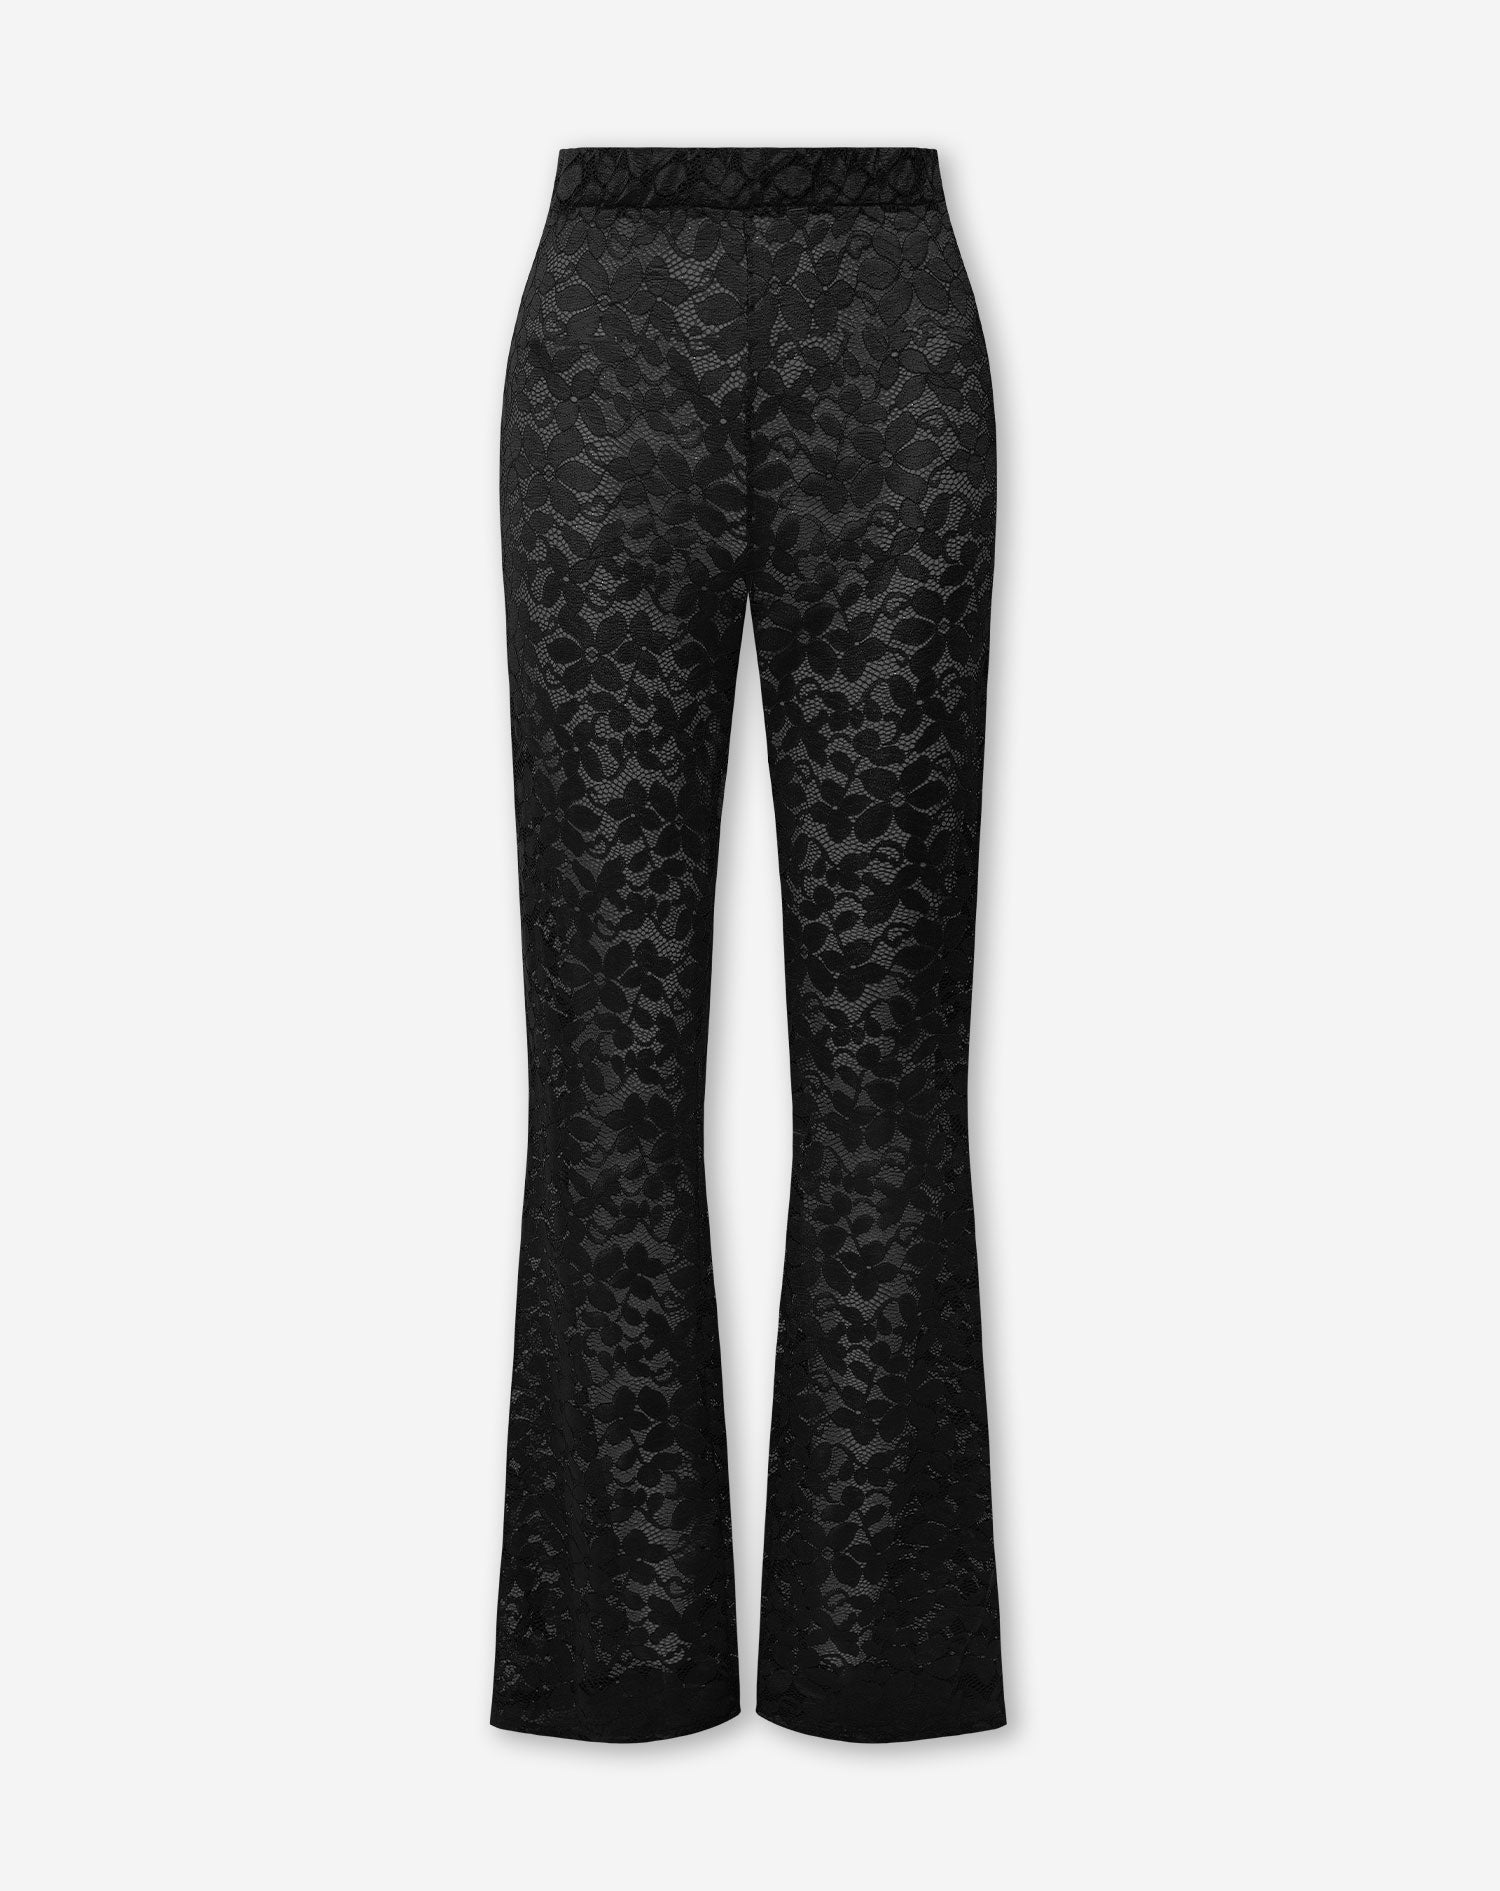 FLOWER LACE FLARED PANTS BLACK